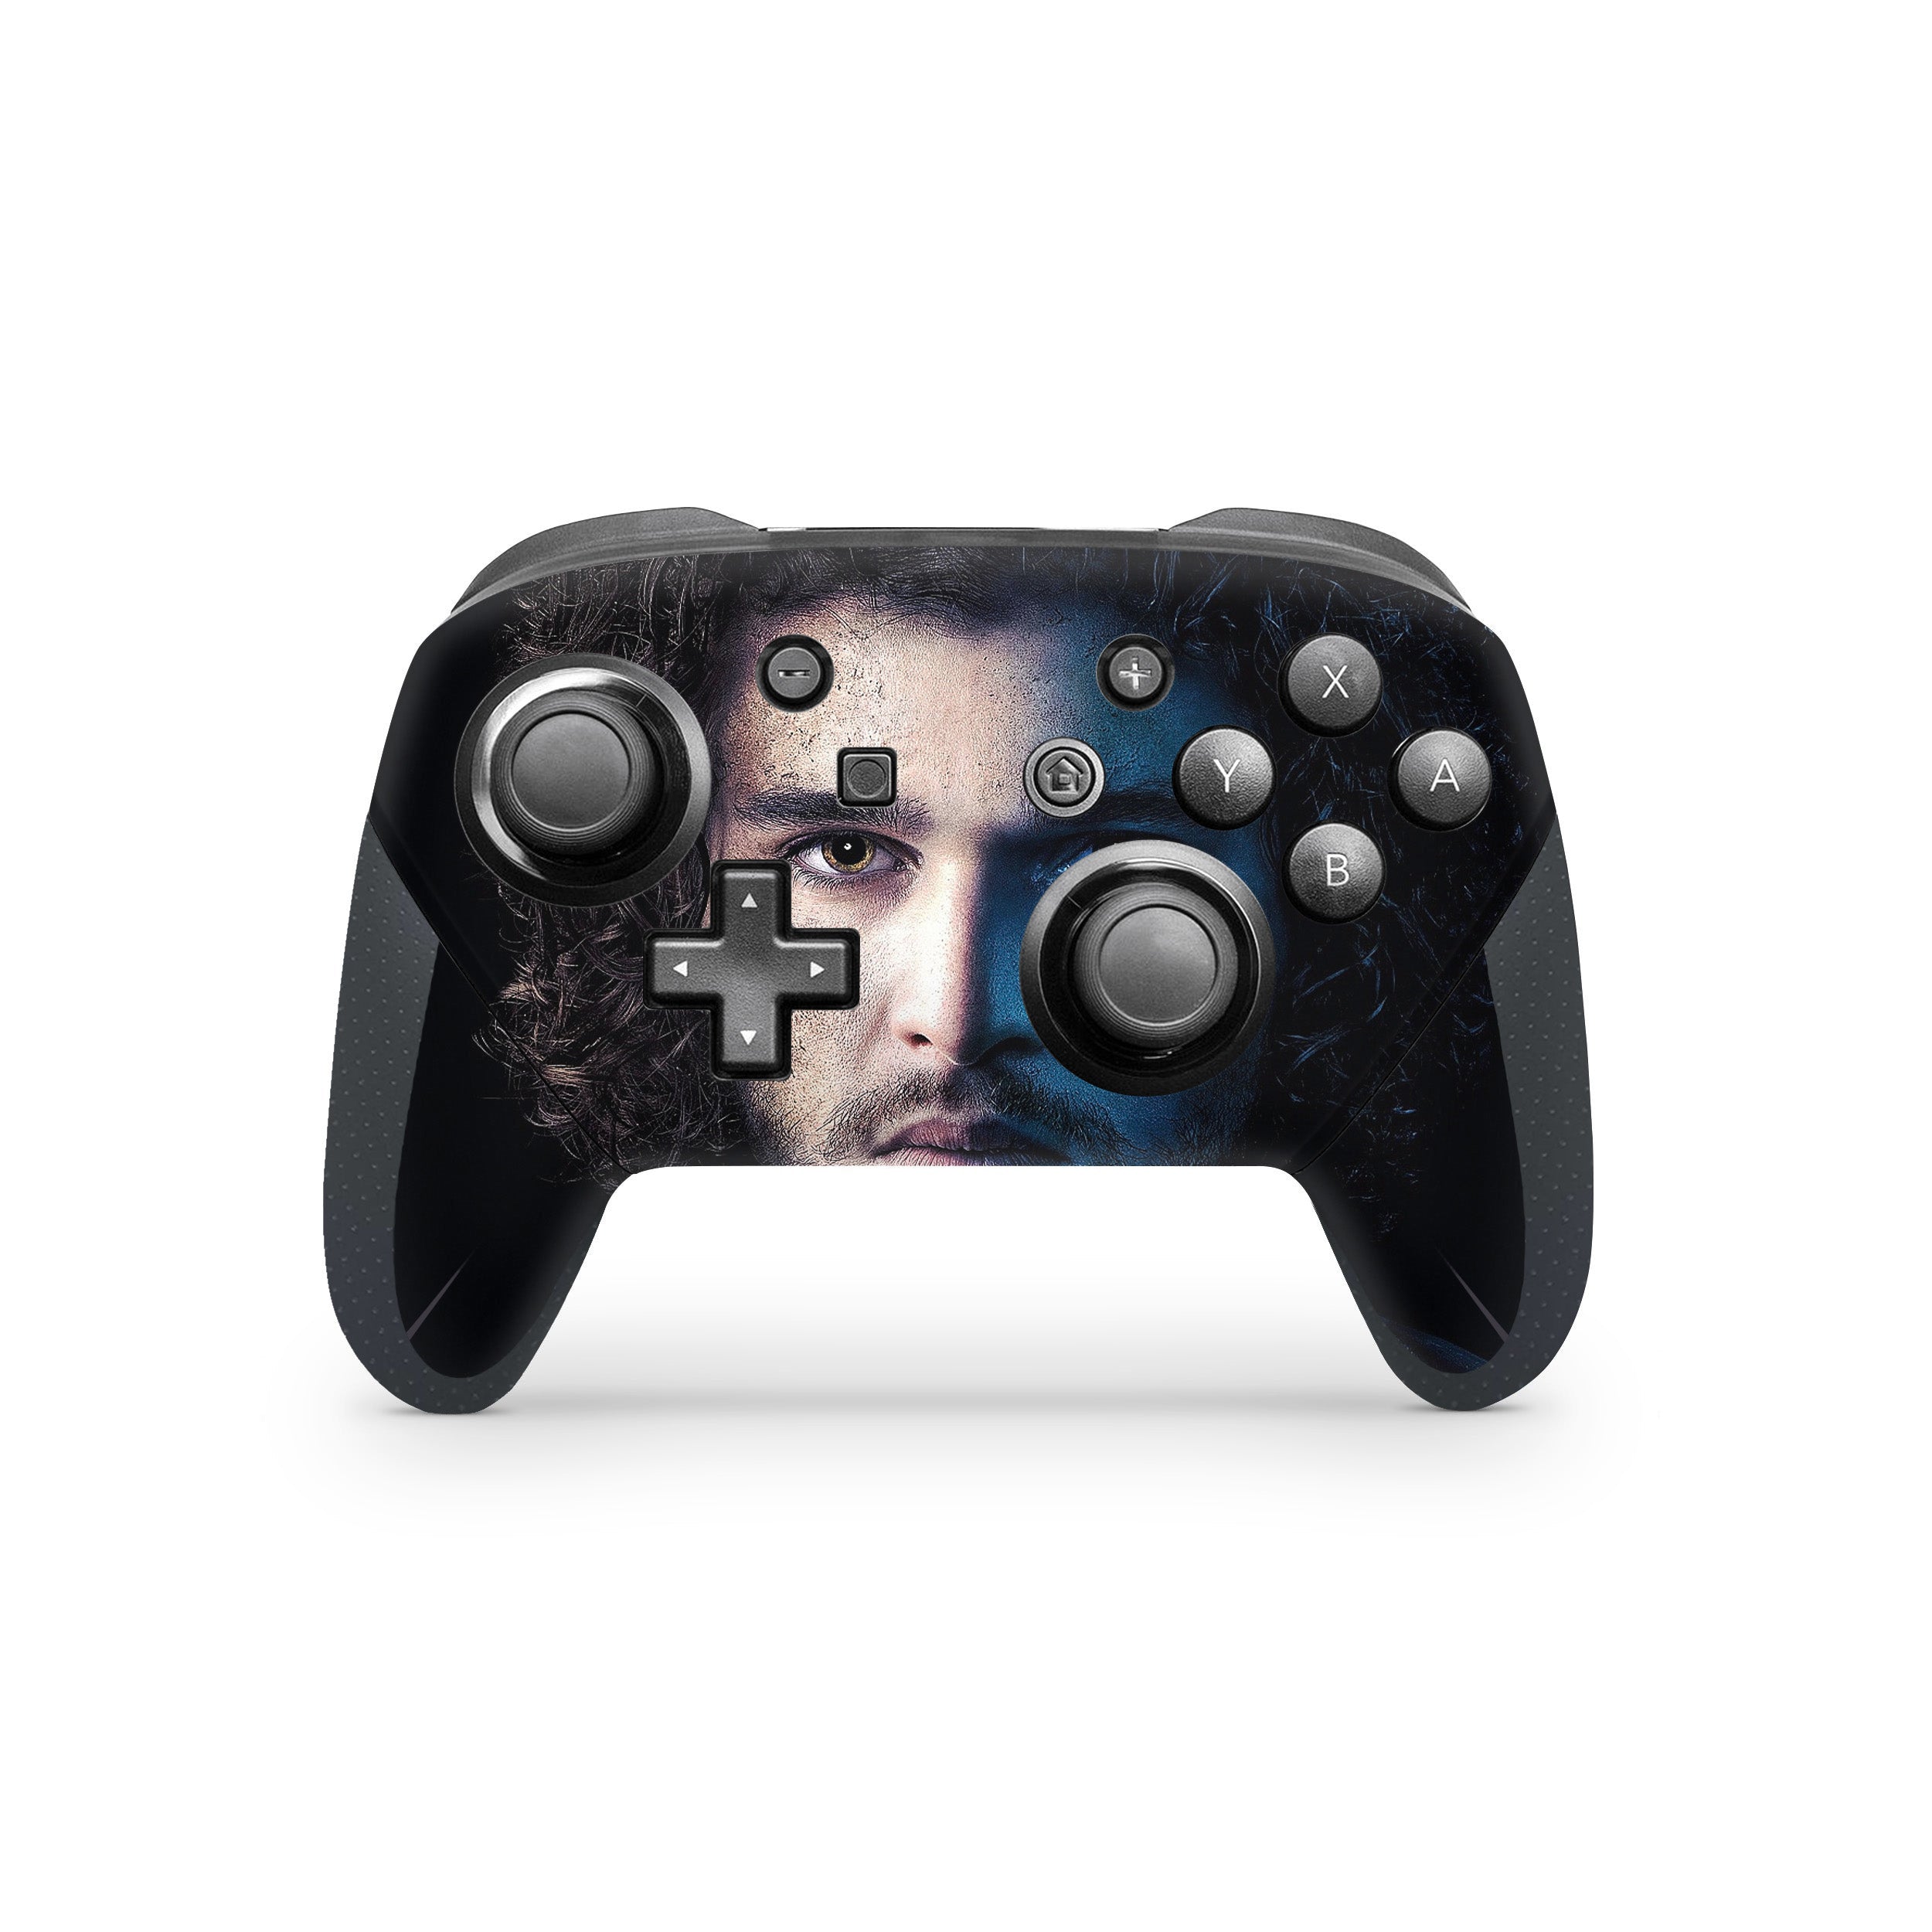 A video game skin featuring a Game Of Thrones Jon Snow design for the Switch Pro Controller.